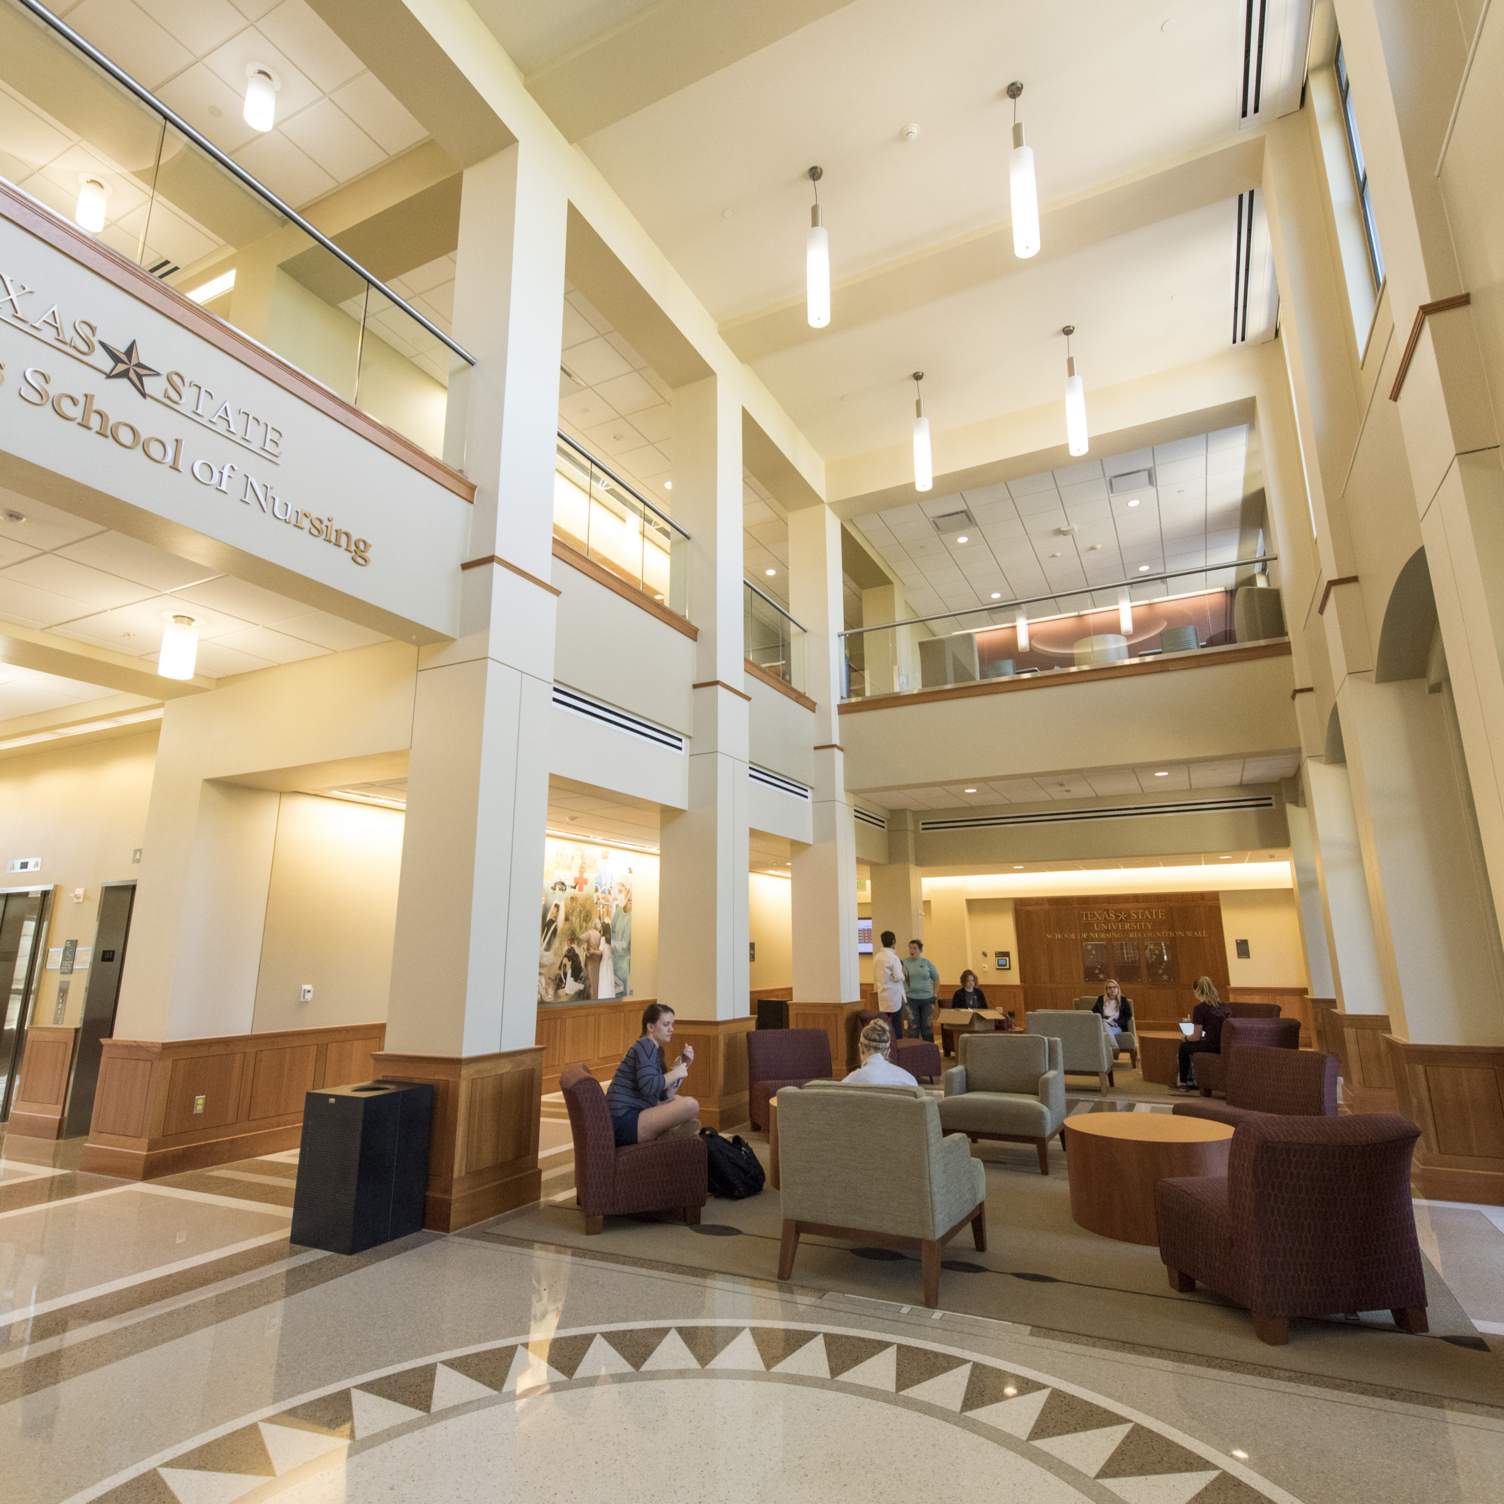 interior view of a round rock campus building lobby